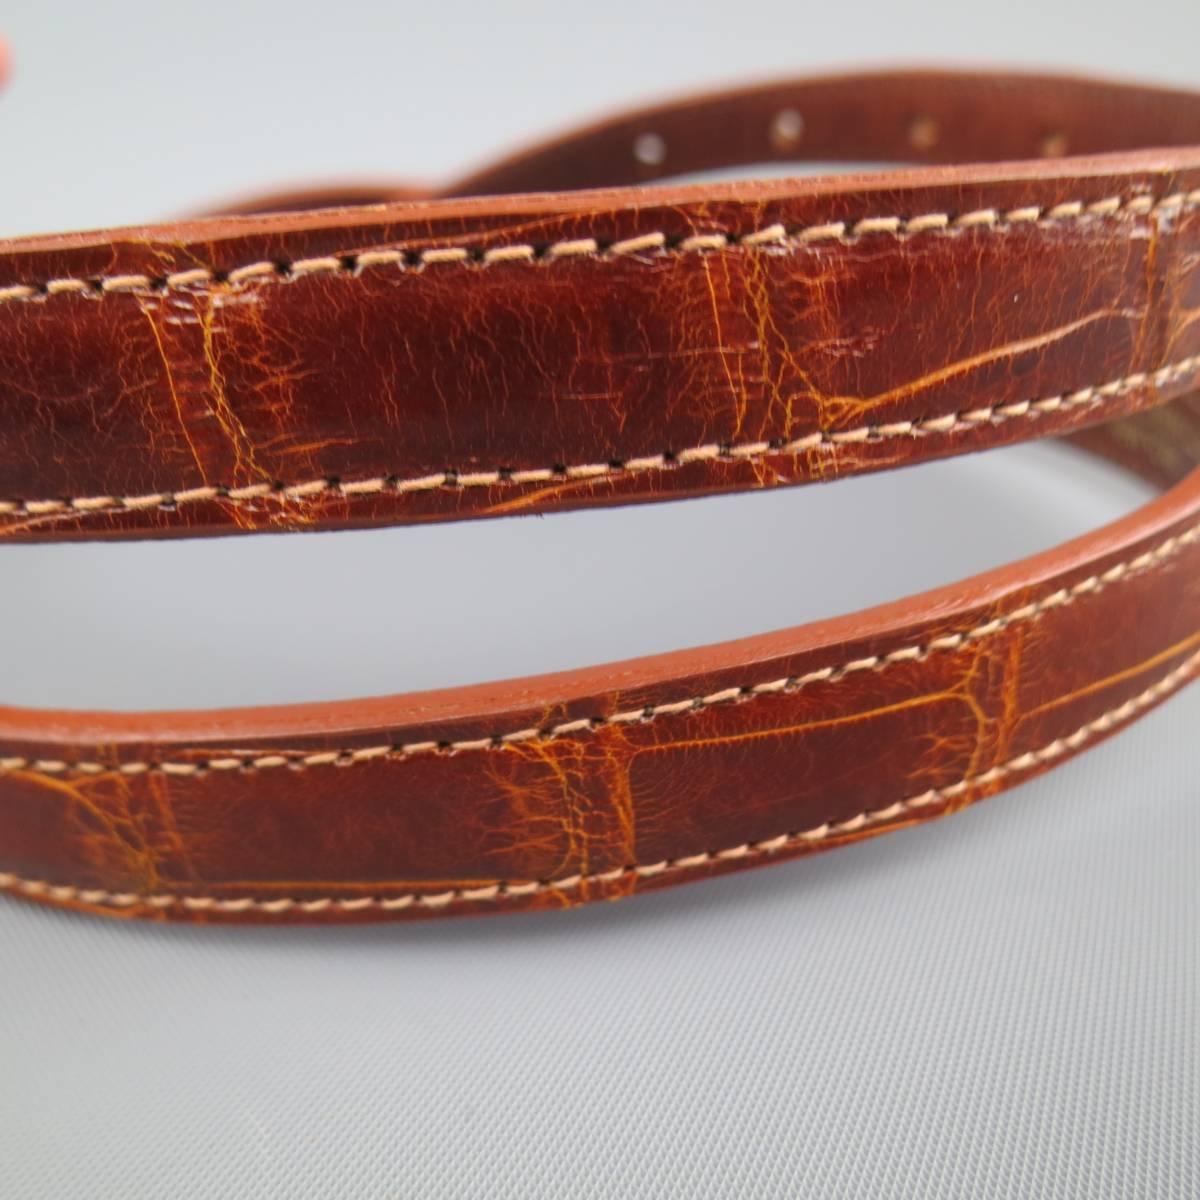 Vintage KIESELSTEIN-CORD belt strap in tan alligator leather with snap closure.
 
Excellent Pre-Owned Condition.
 
Measurements:
 
Length: 41.5 in.
Width: 0.60 in.